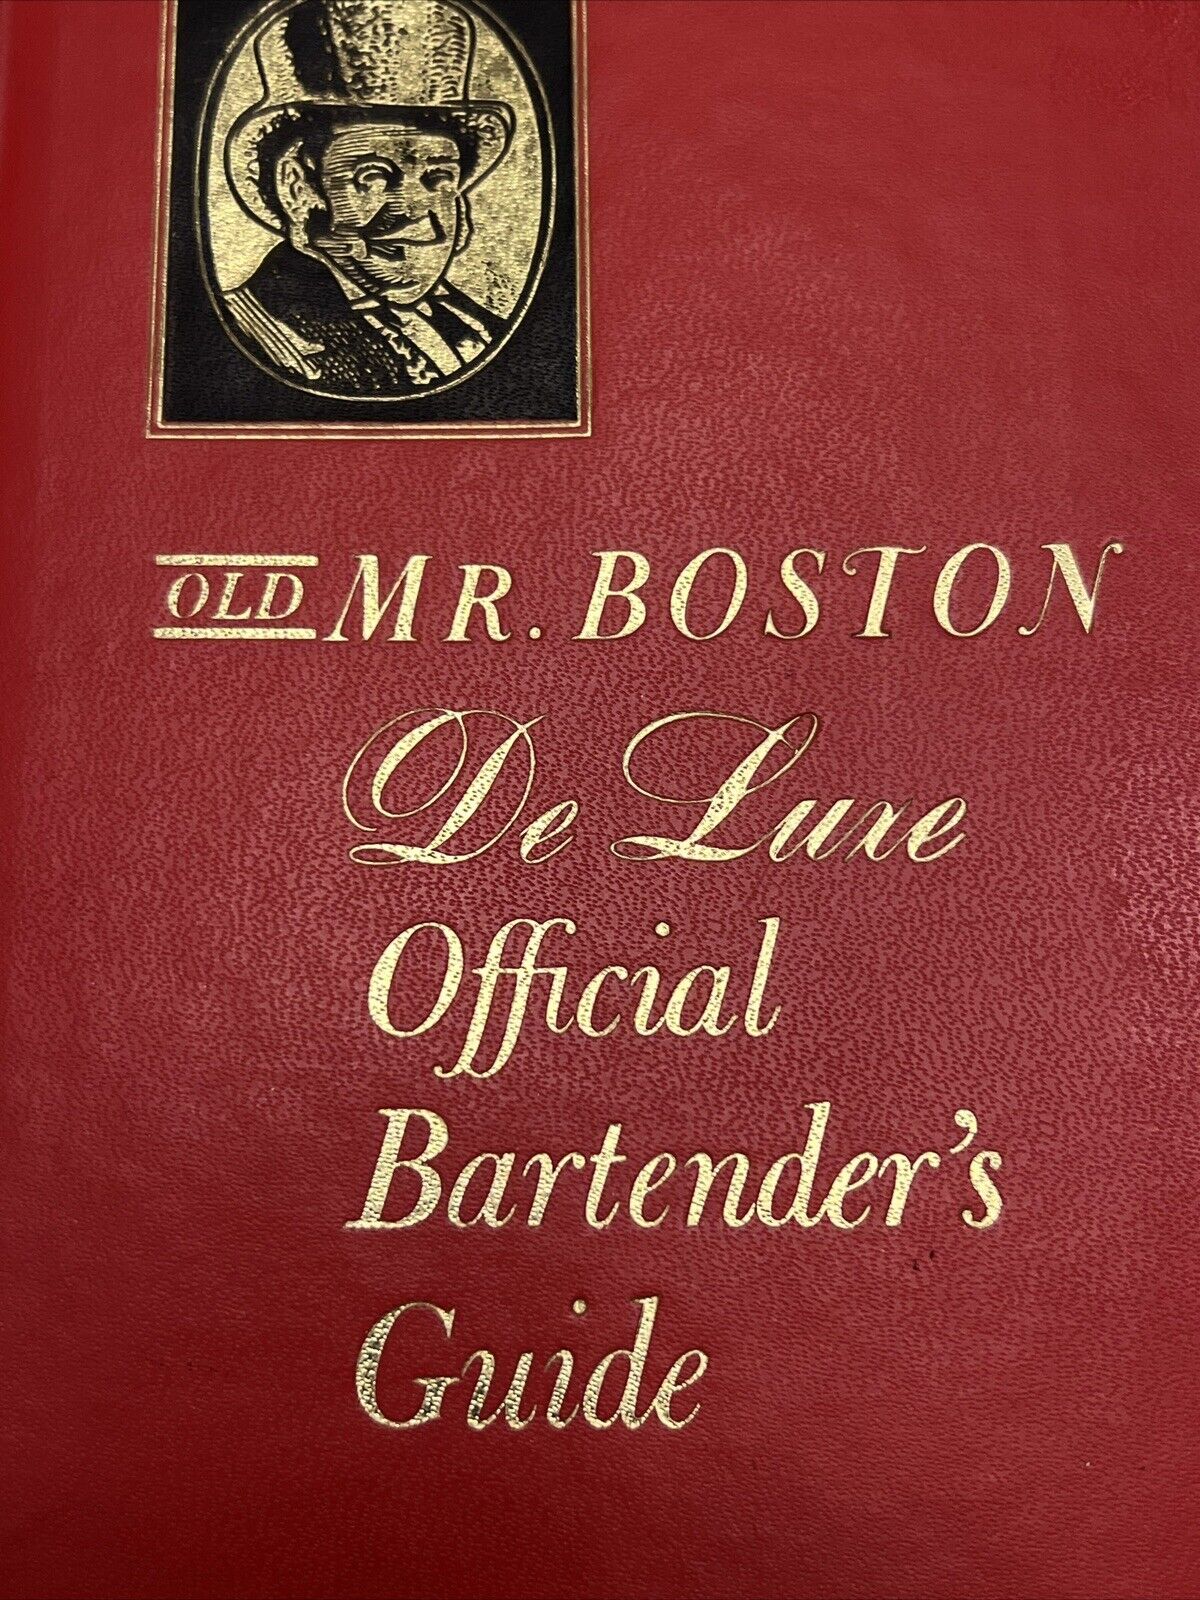 Vintage 1962 Old Mr. Boston Deluxe Official Bartender's Guide Book - Great Cond.